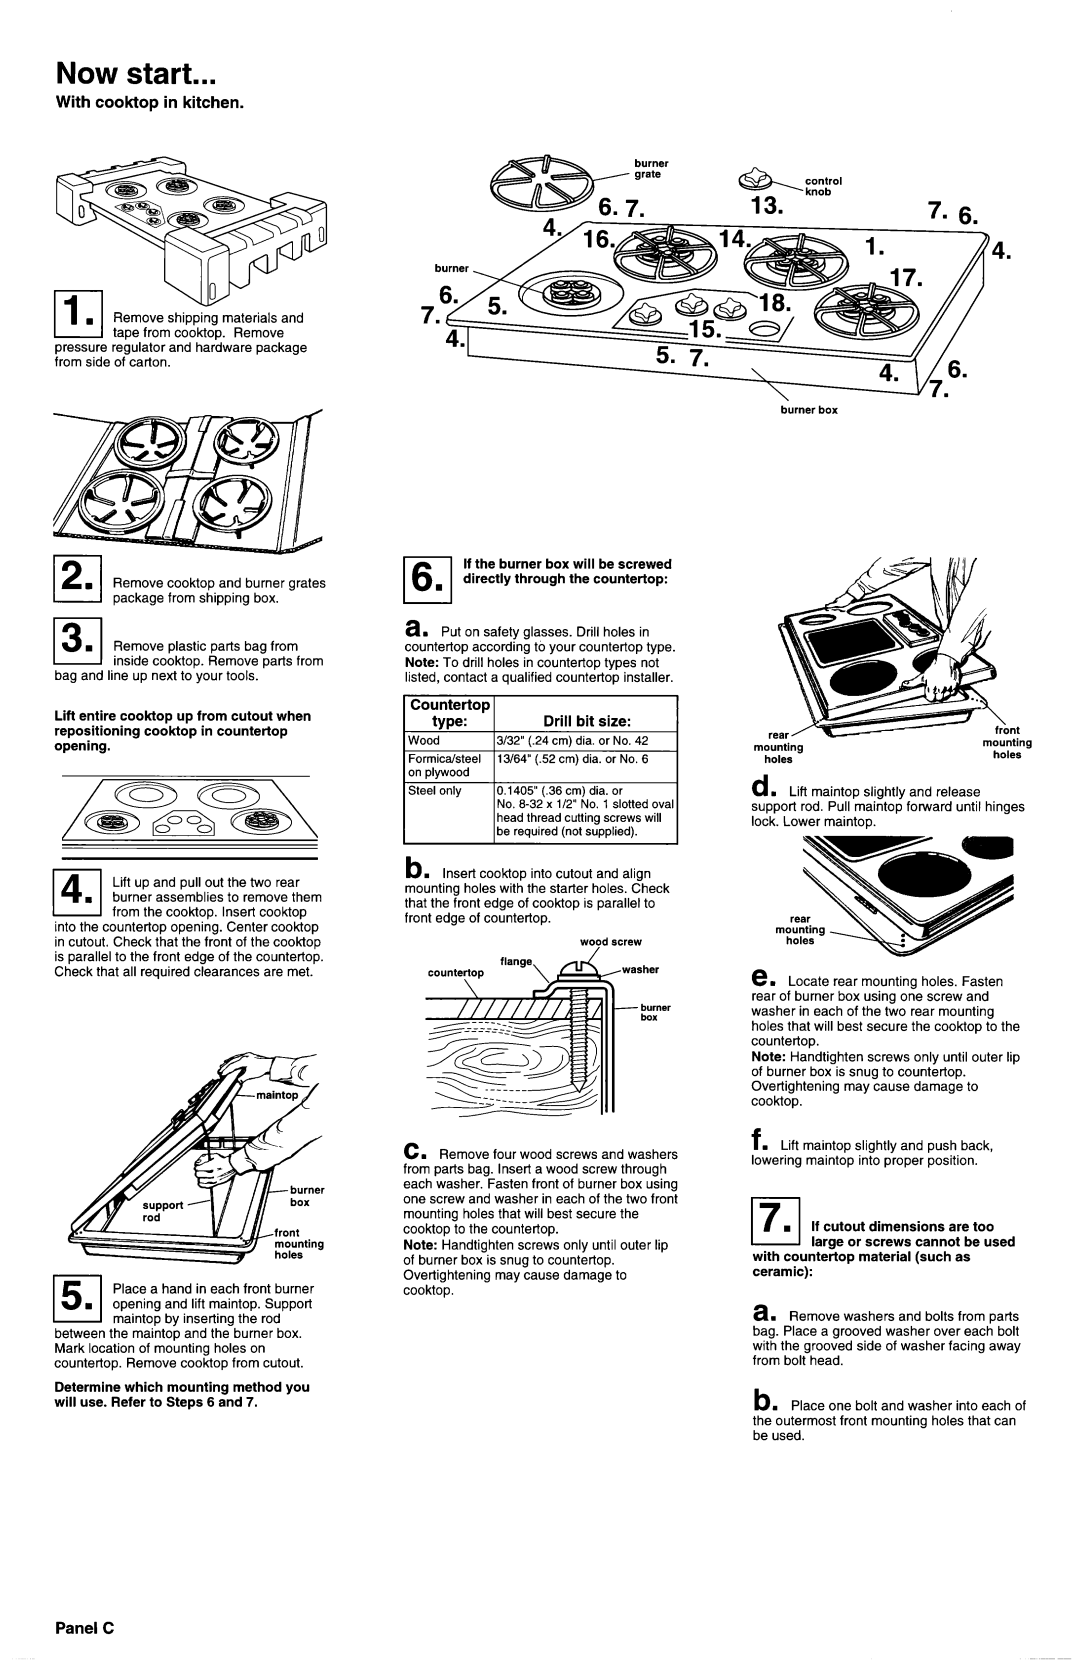 Whirlpool 3189086 installation instructions Now start, With cooktop in kitchen, Countertop, bit size, type, Panel C, Drill 